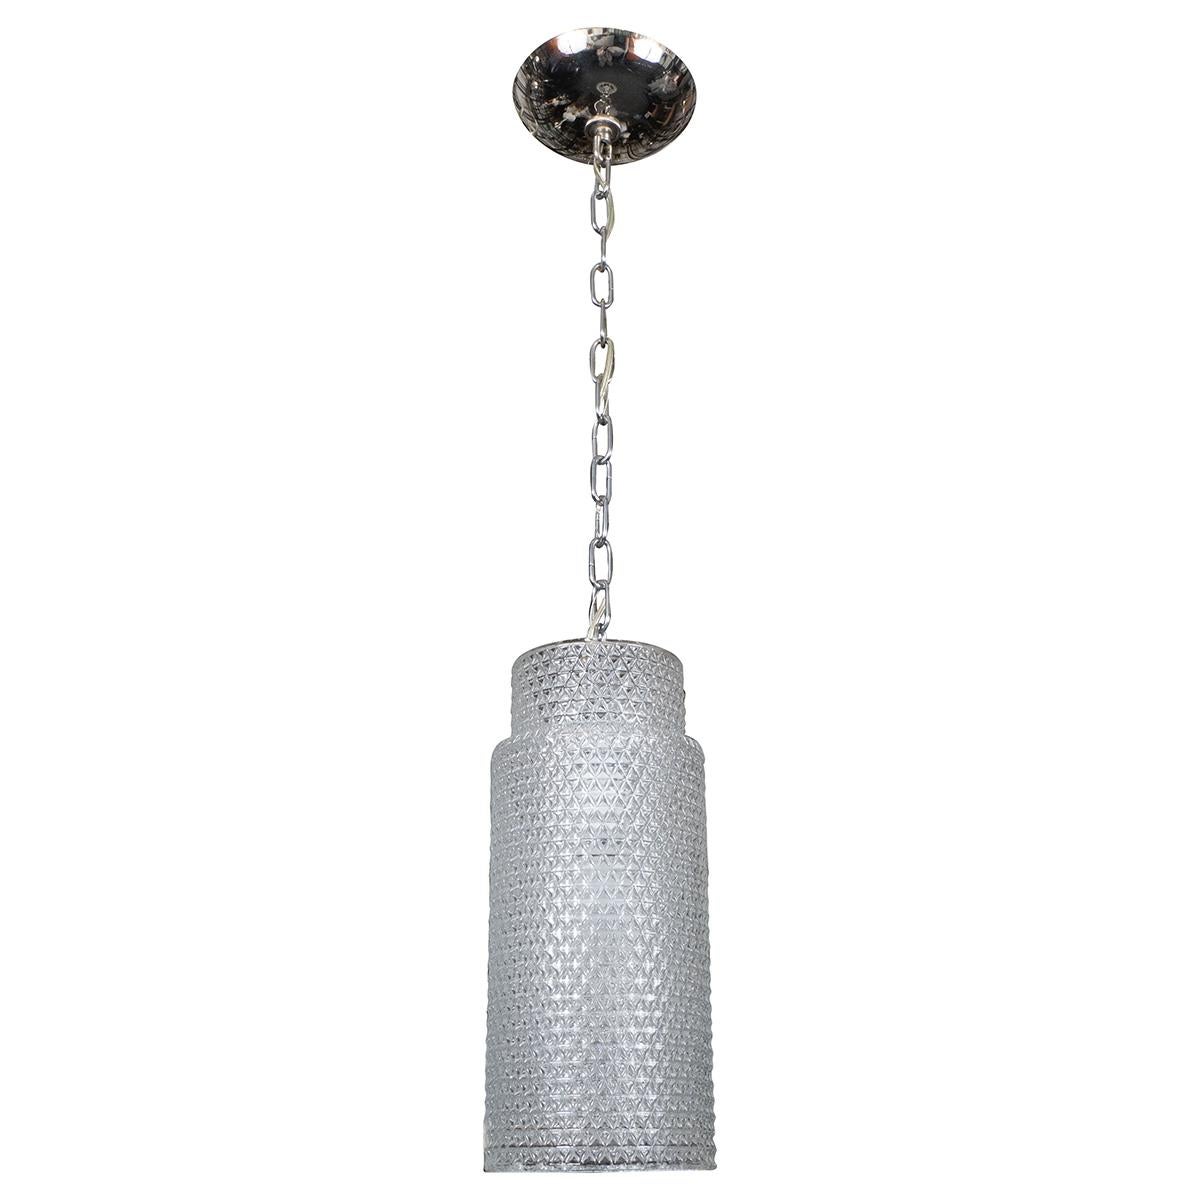 Molded glass cylindrical pendant with nickel hardware.